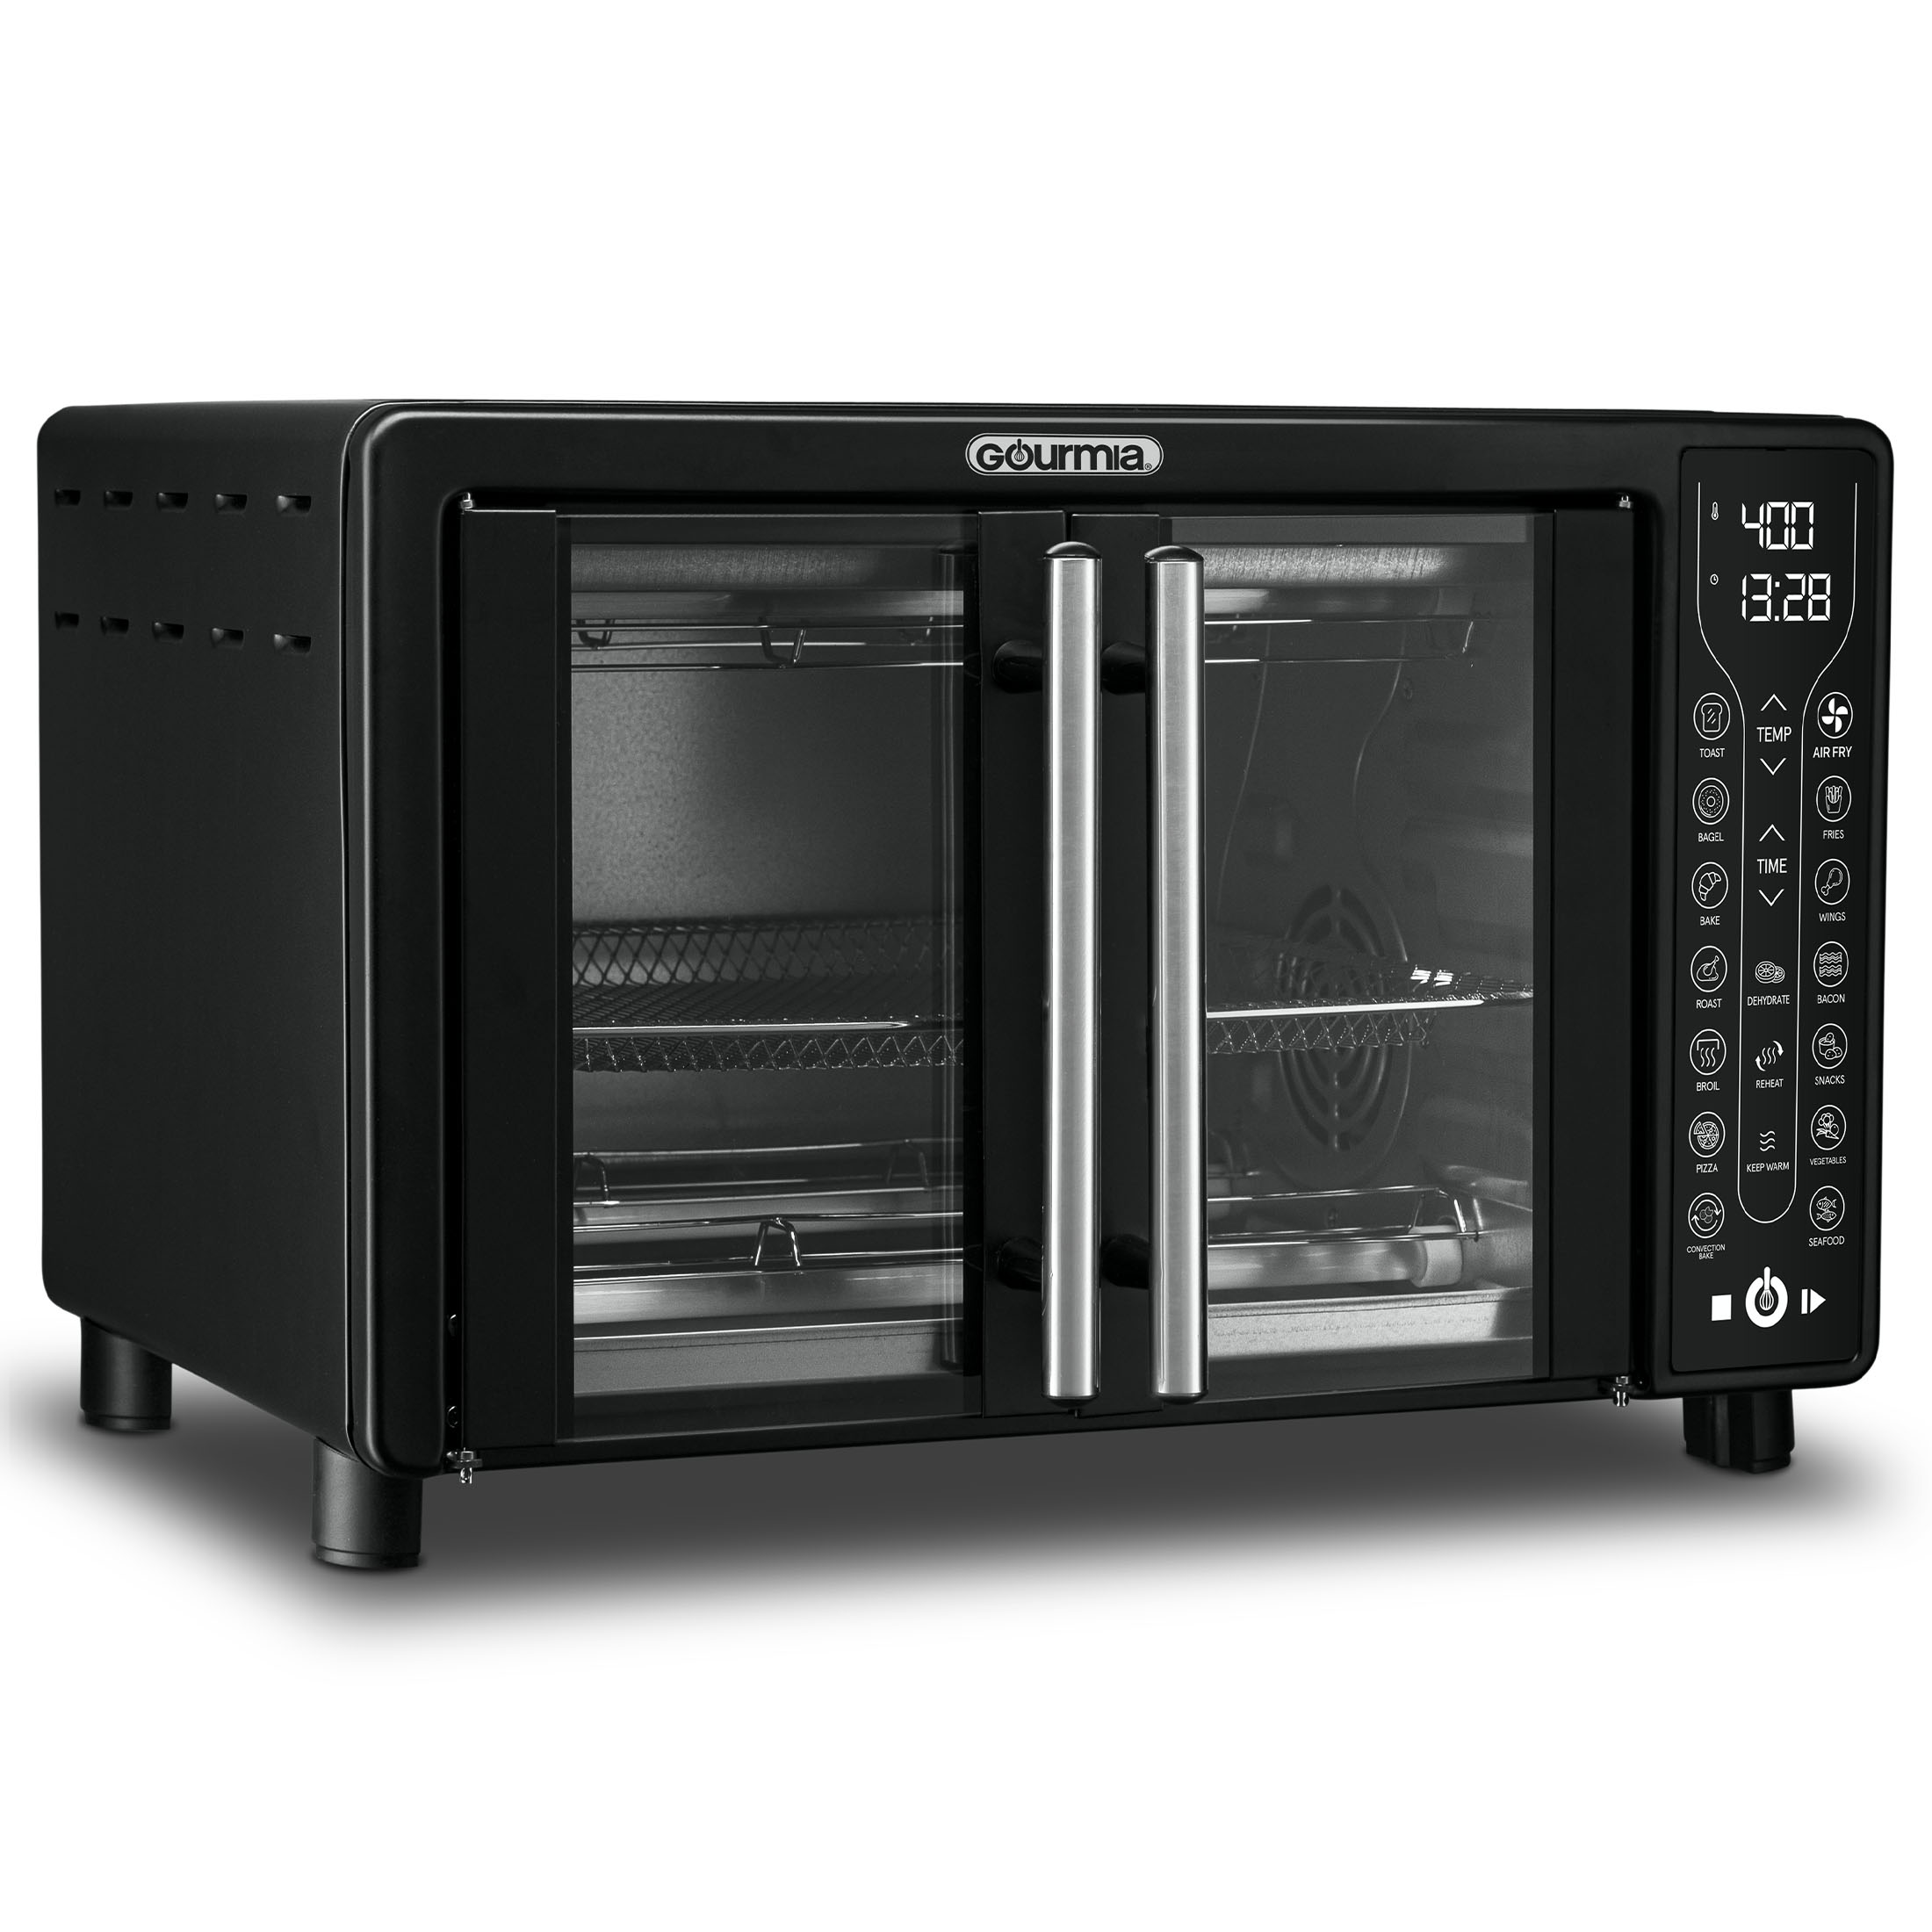 Gourmia Digital French Door Air Fryer Toaster Oven, Black - image 3 of 7